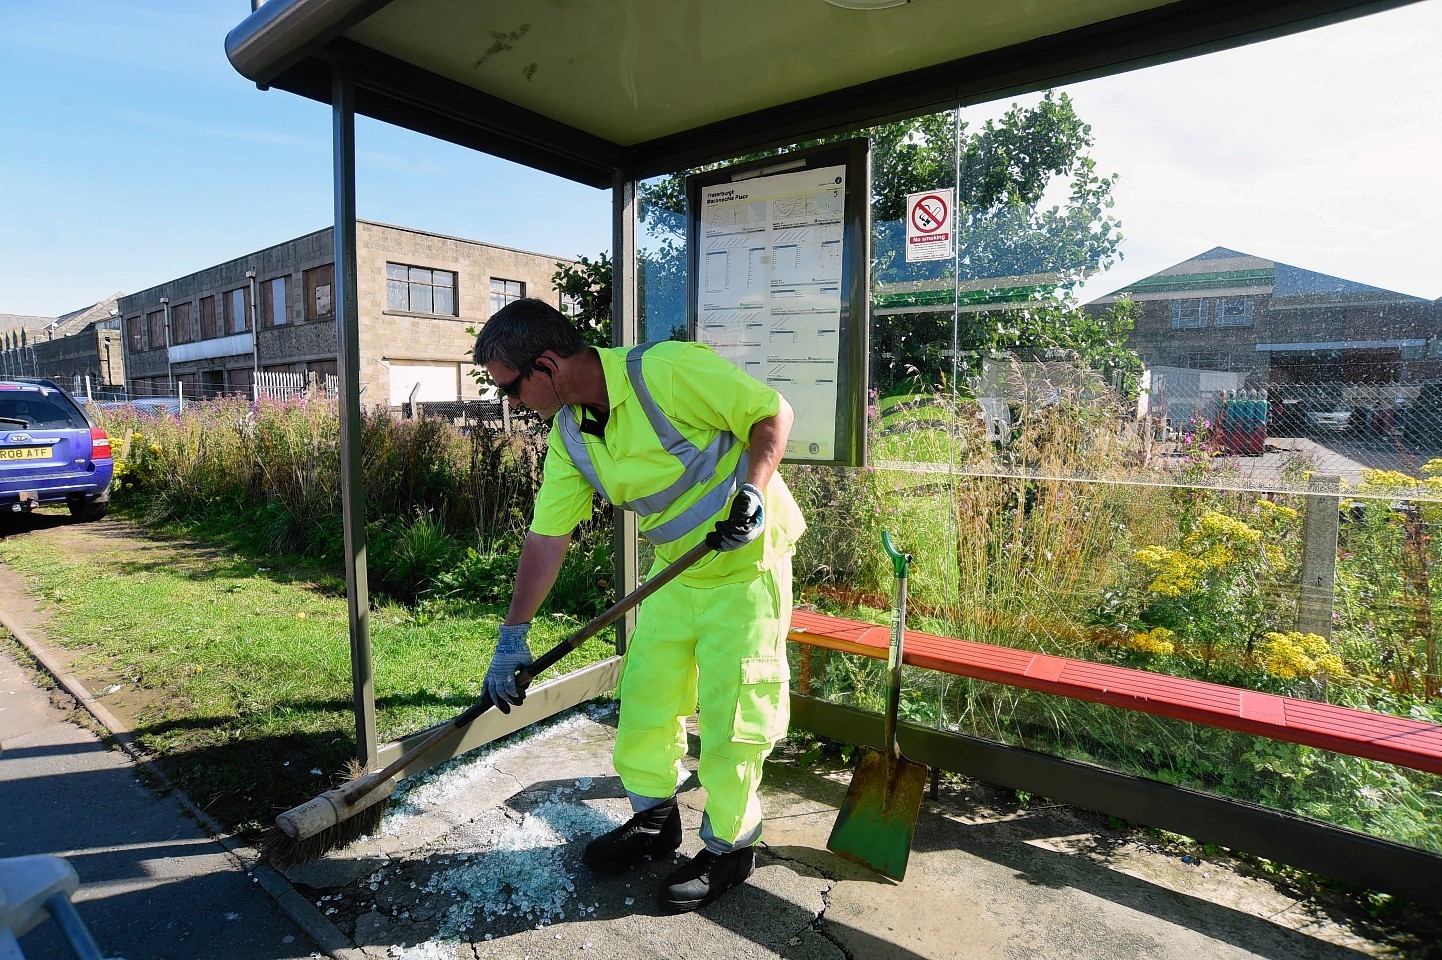 A council workman cleans up damage at a Fraserburgh bus shelter